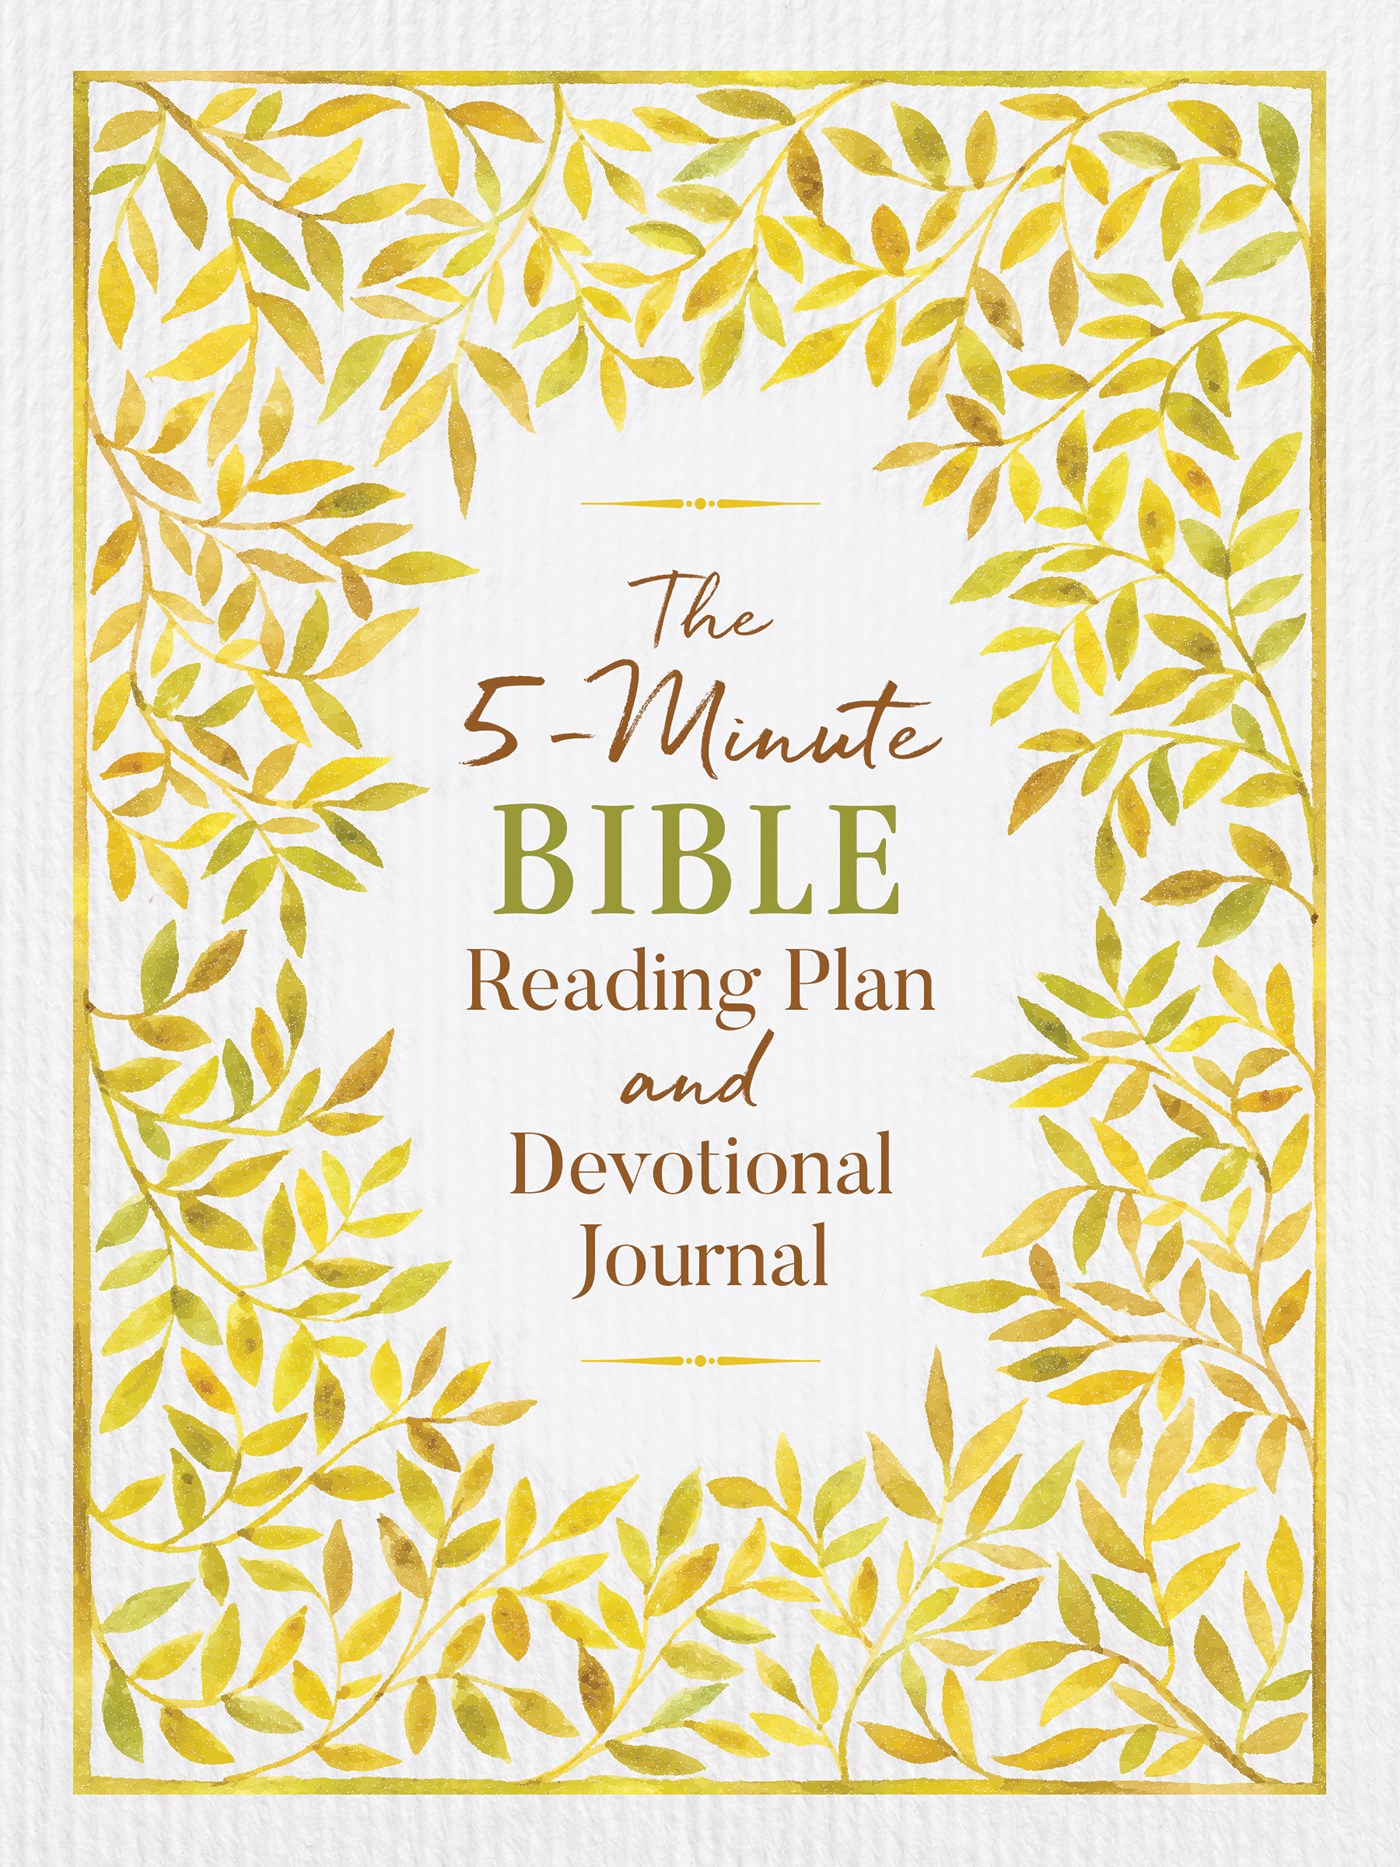 The 5Minute Bible Reading Plan And Devotional Journal 9781643520711 eBay